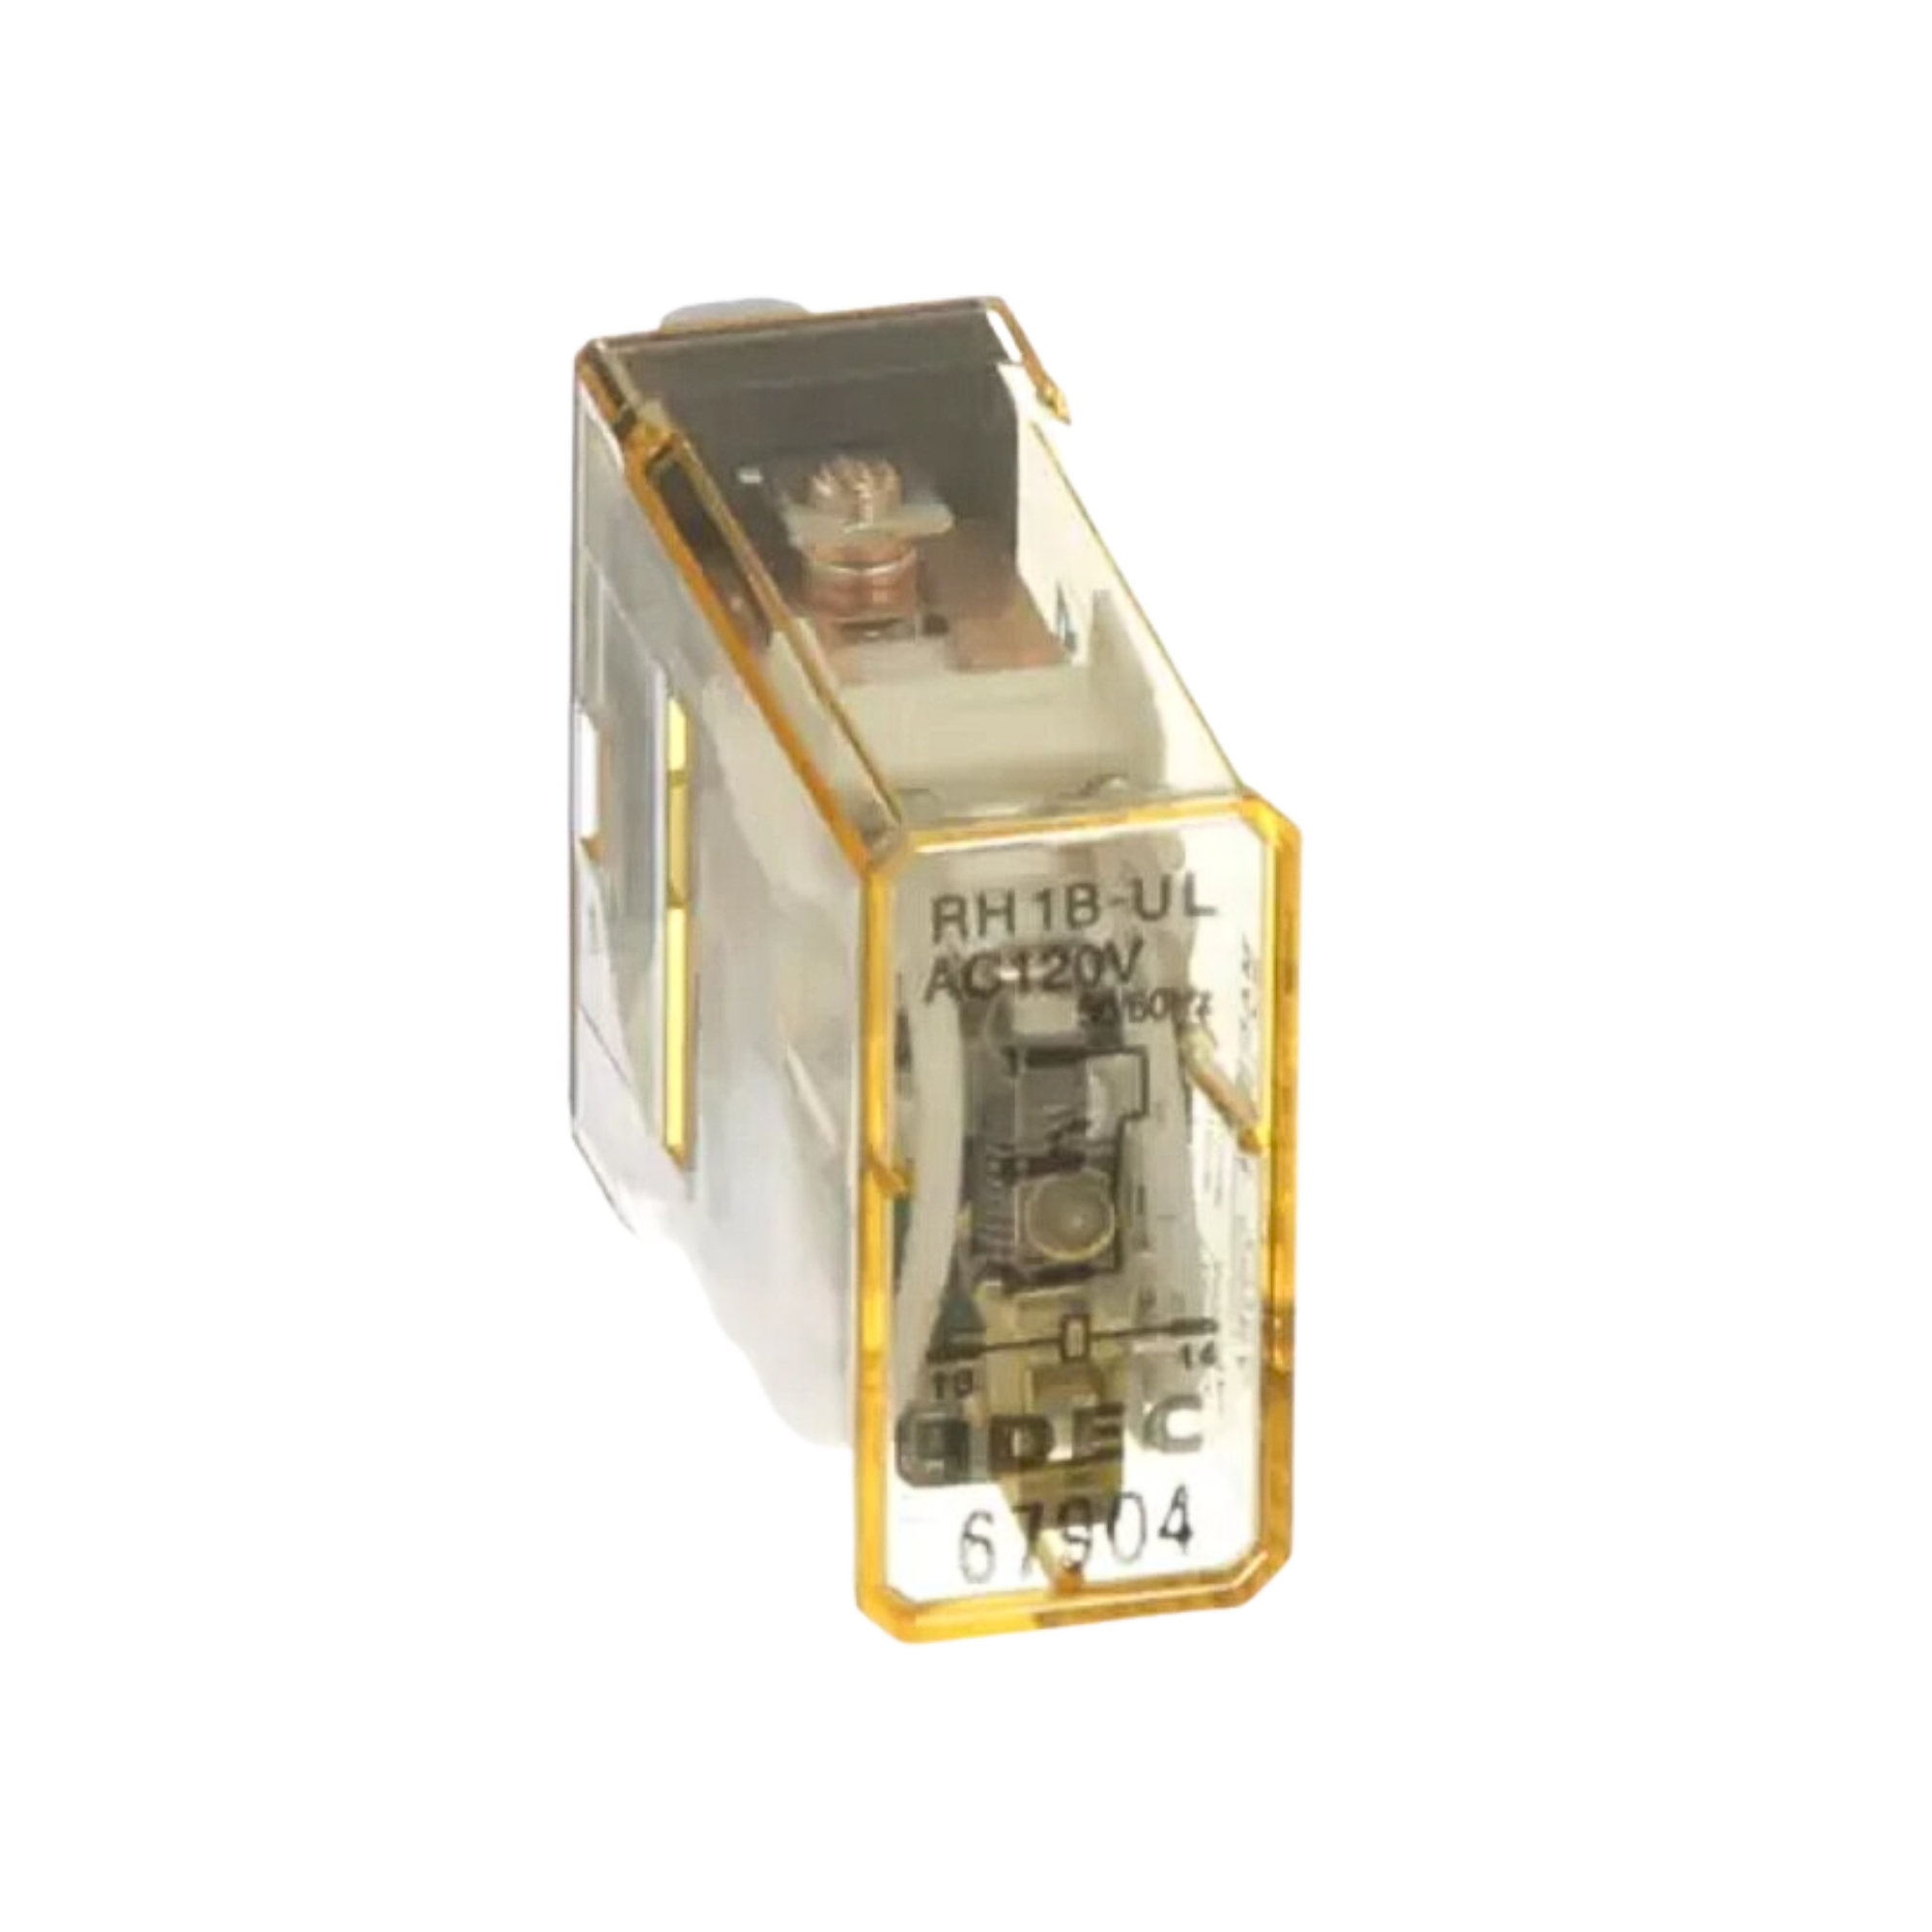 Plug-In Relay | RH1B-ULAC120V used on Idec product line - front view